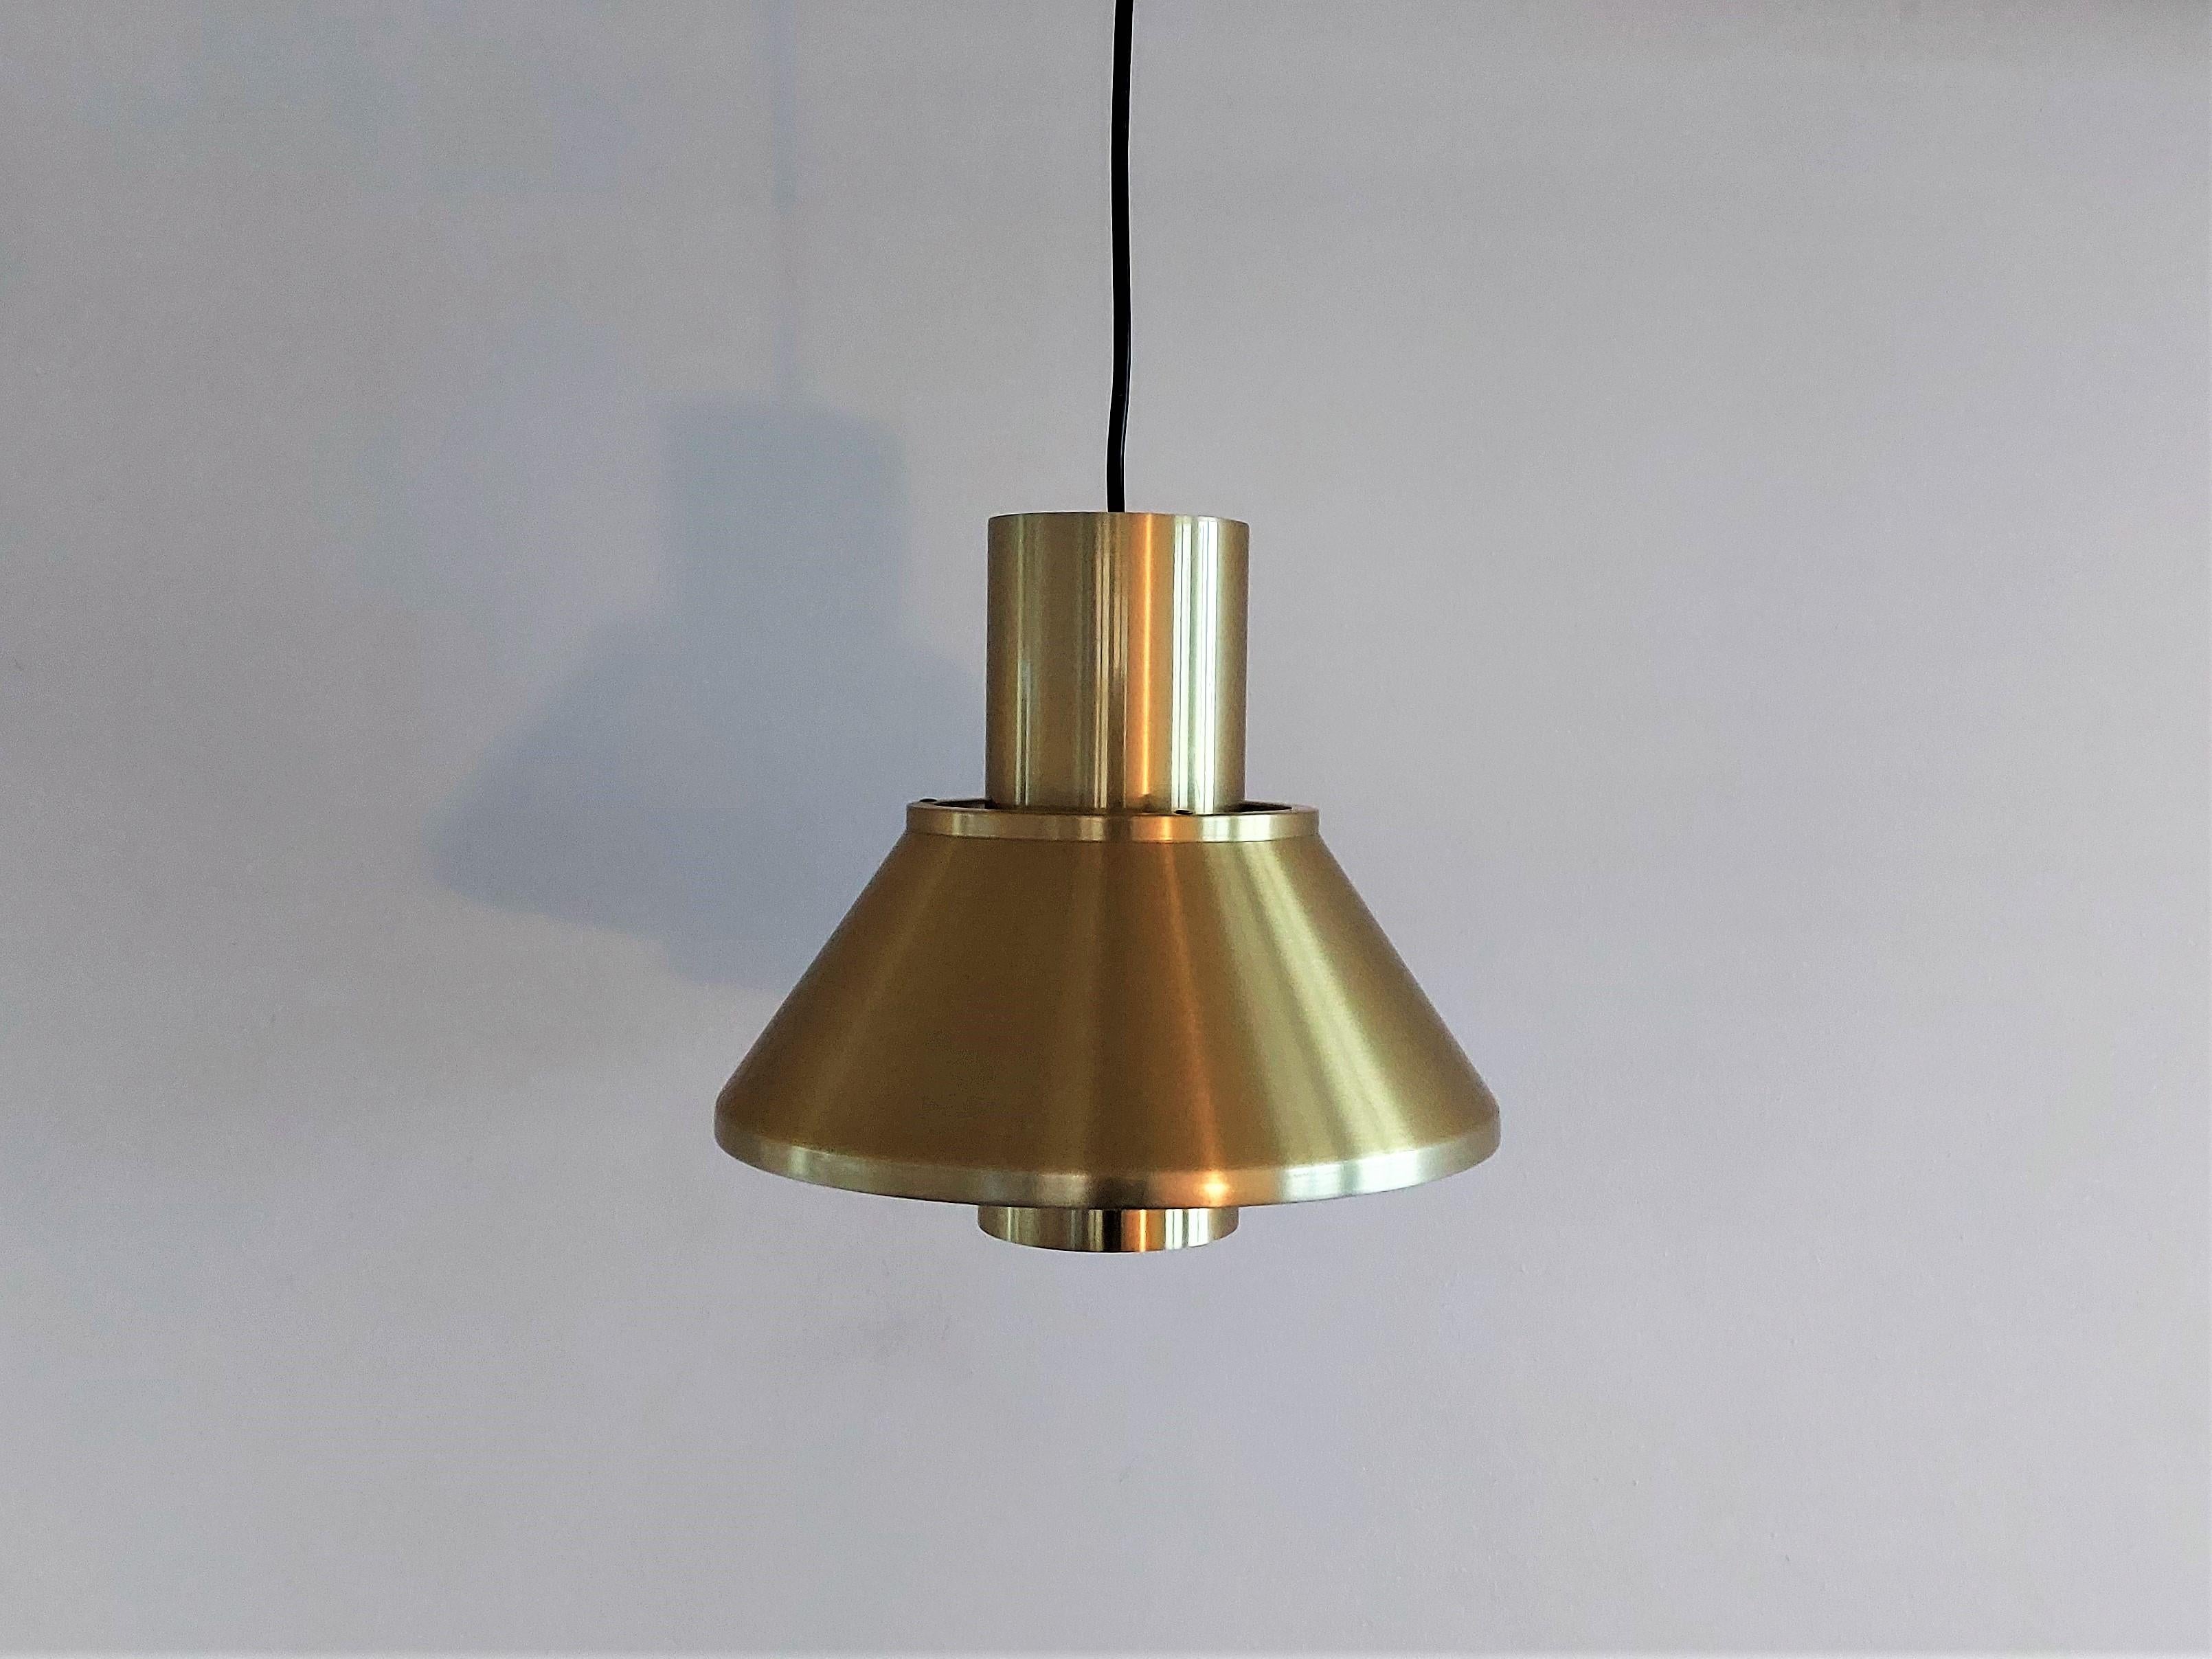 The 'Life' pendant lamp is a beautiful medium sized pendant lamp that gives a direct light and also warm illumination of the room. It has a aluminium shade with a gold colored coating. The inside of the lamp is white. We very 3 of these lamps